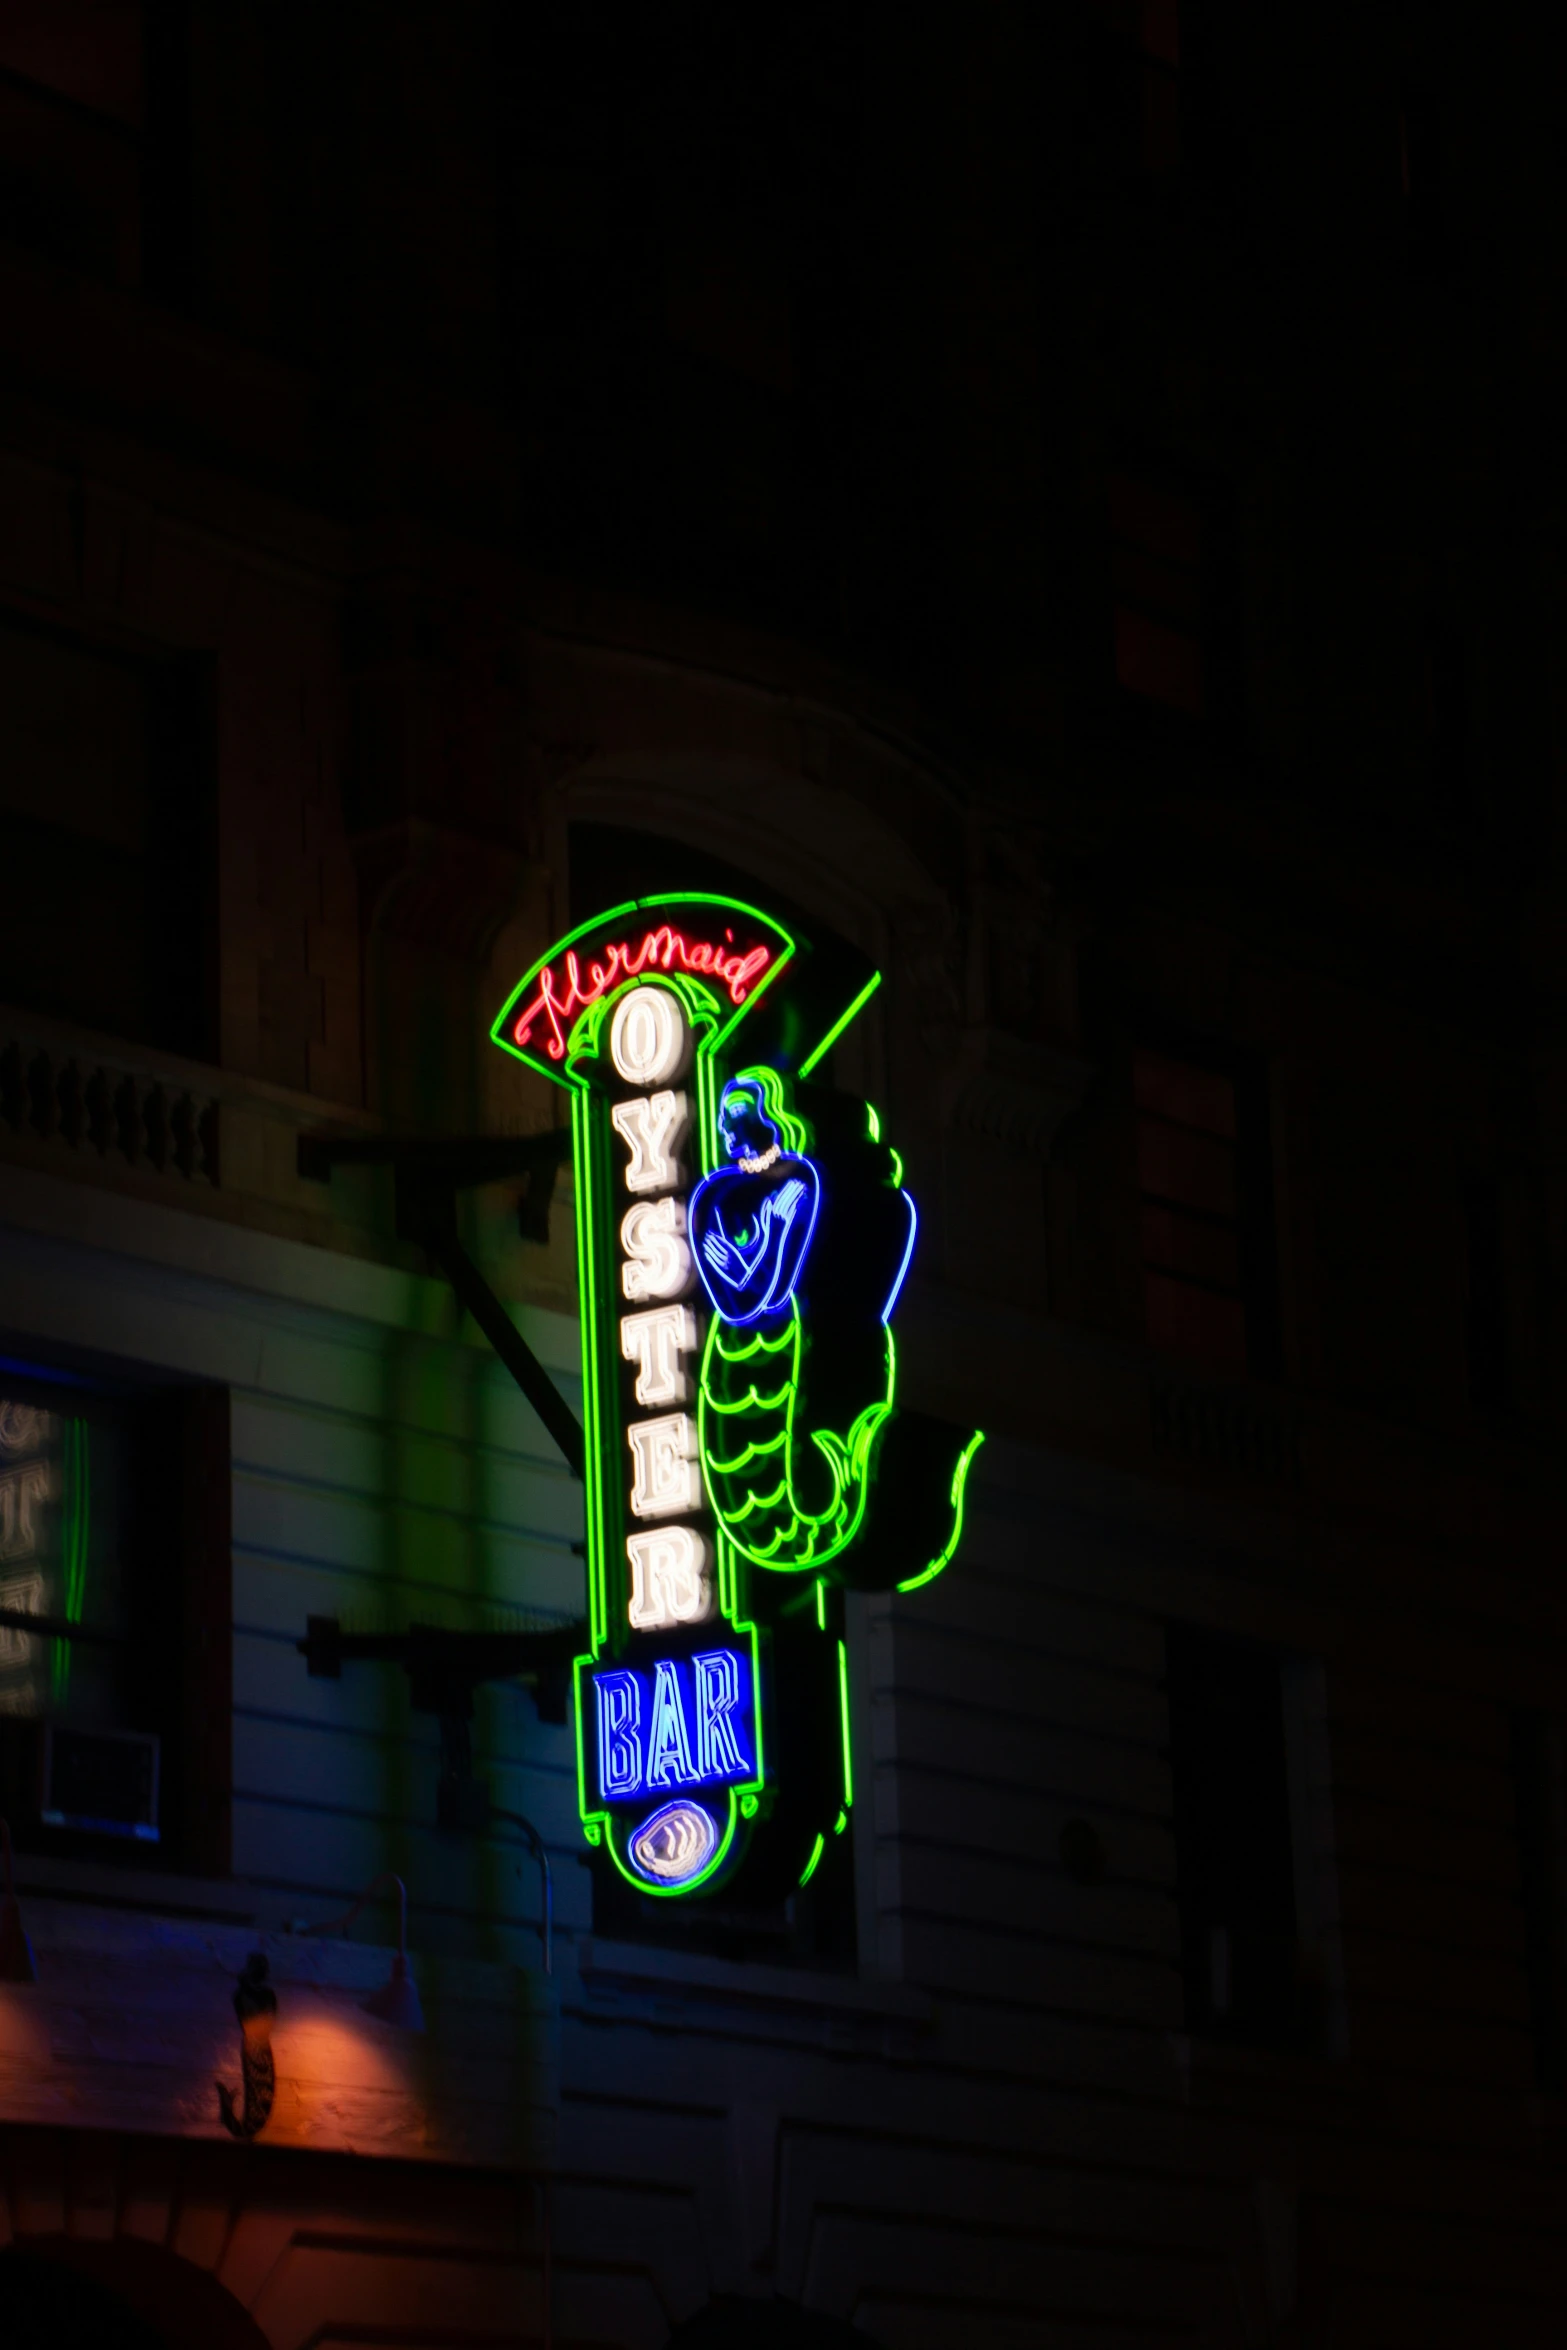 the neon sign on the building is very brightly lit